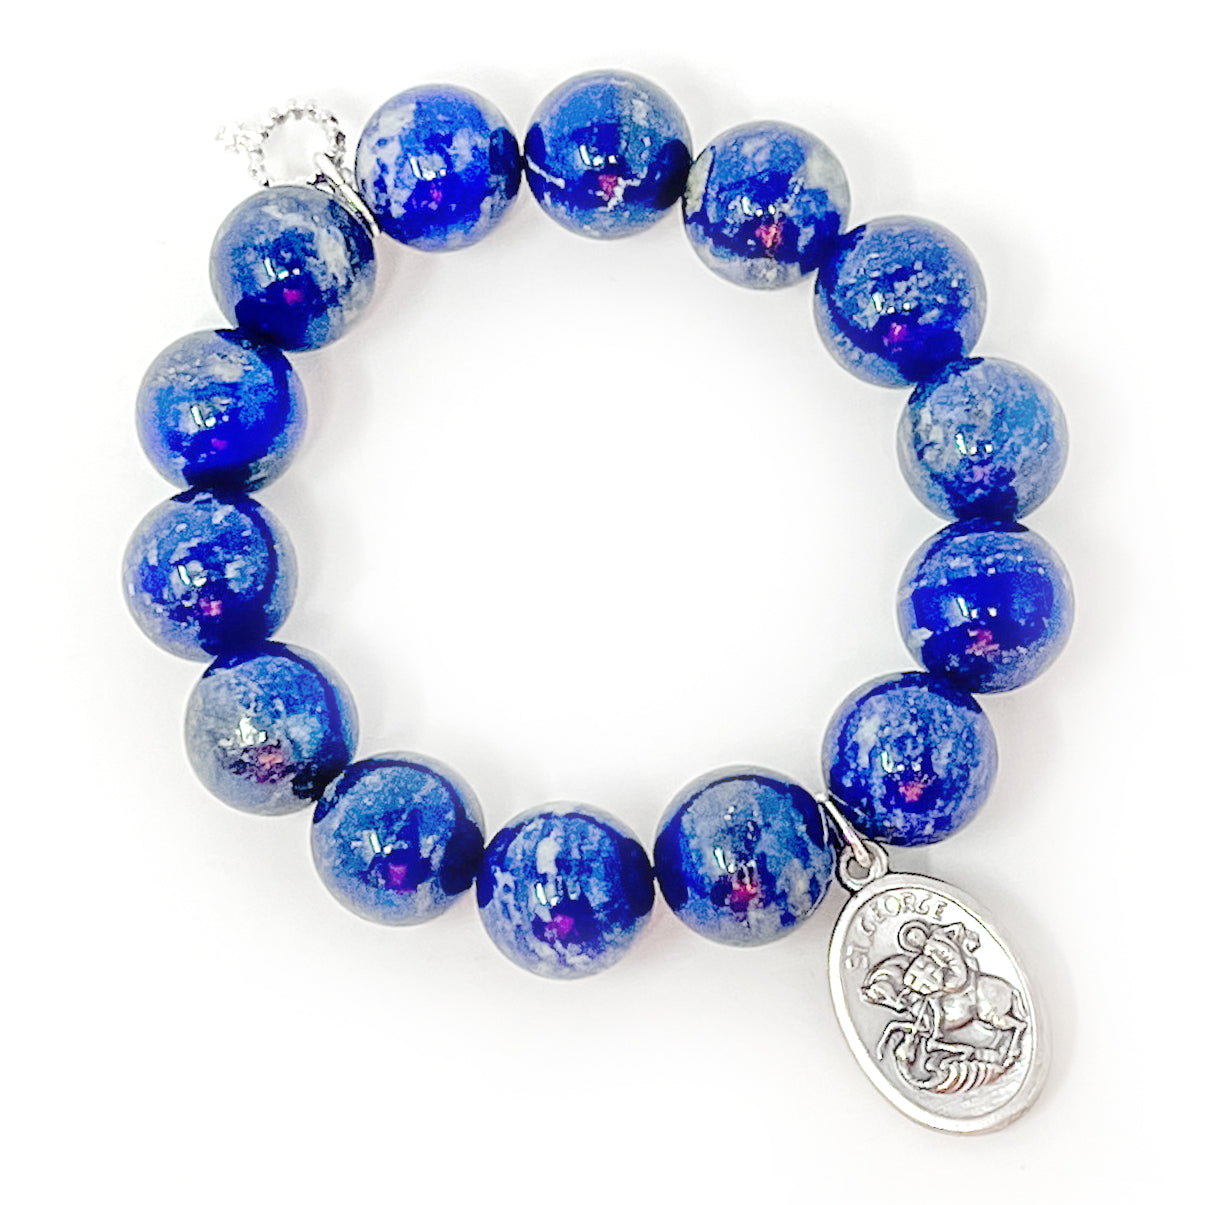 PowerBeads by jen Jewelry Lapis with Saint George-Patron Saint of Soldiers and the Ukraine